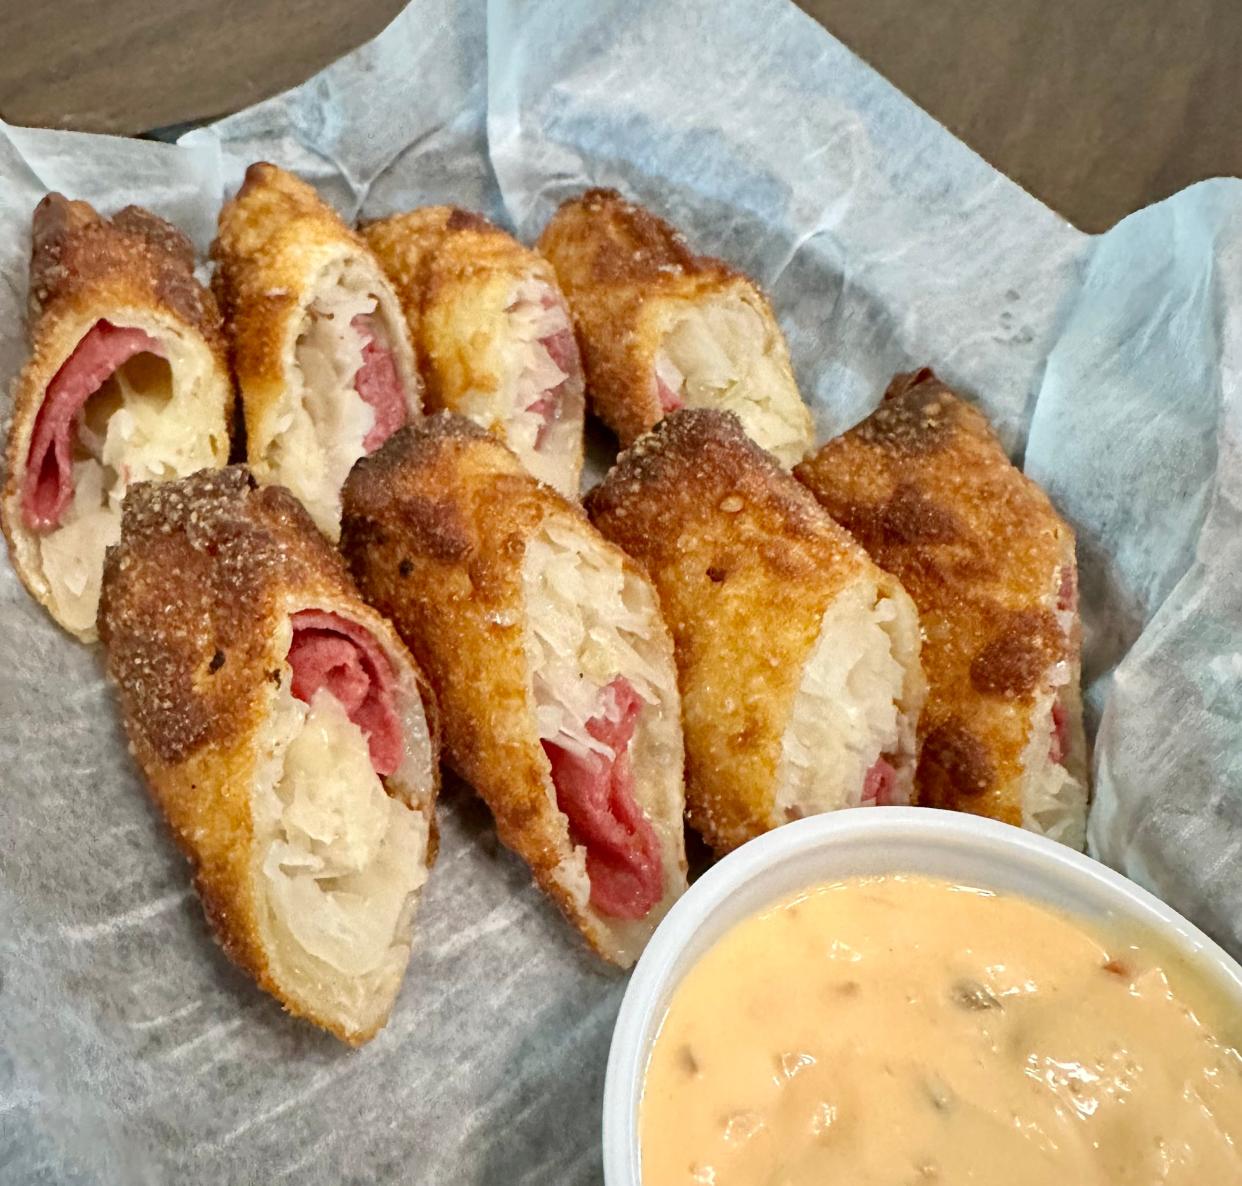 Irish spring rolls, among the appetizers available at Bogey's Pub & Grille in Plain Township, are served with thousand island dressing for dipping.